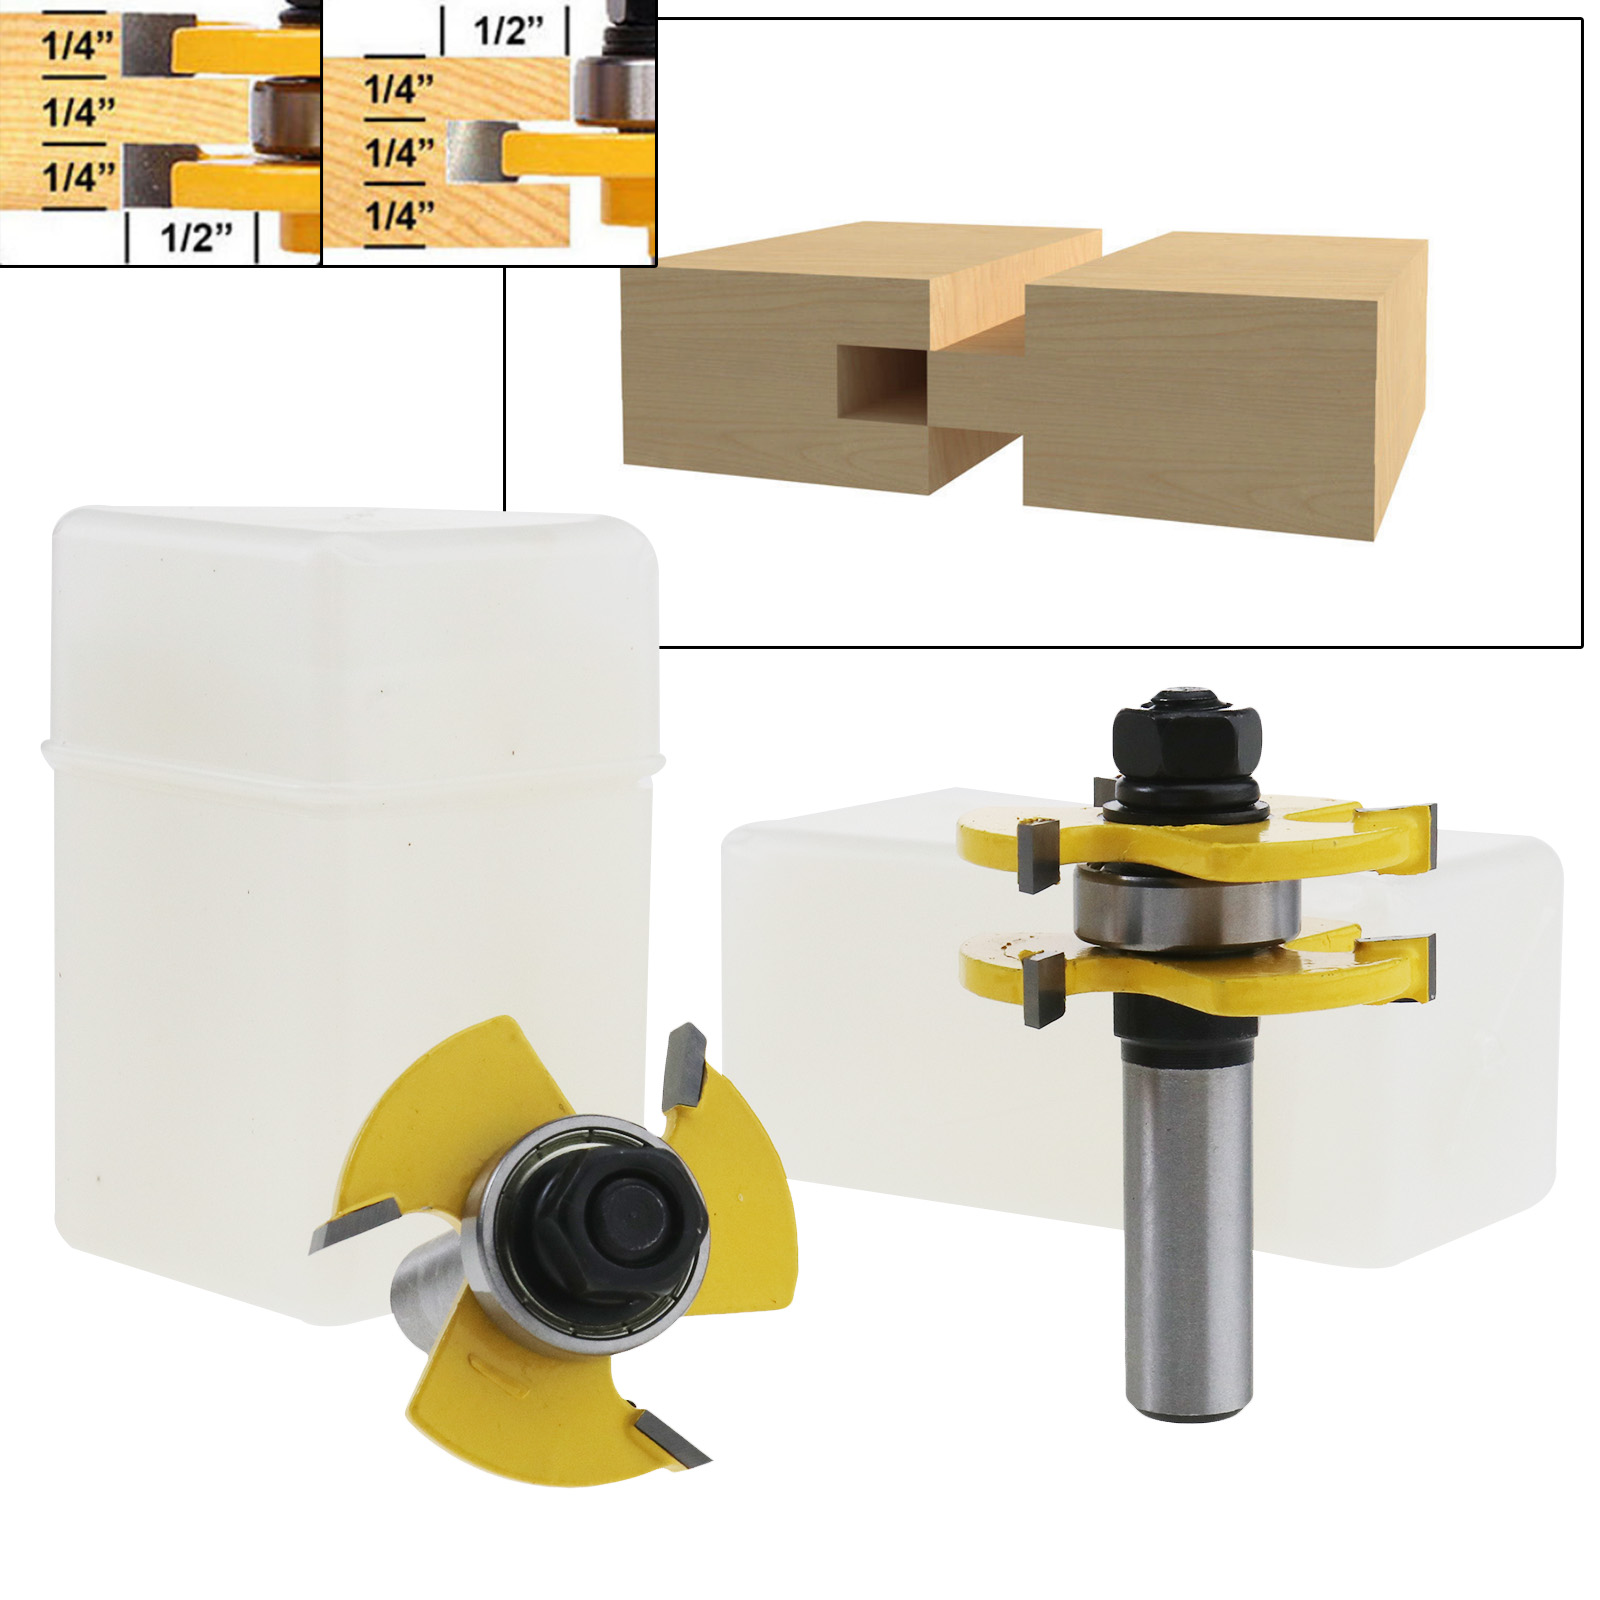 tongue and groove router bits for 2 inch stock